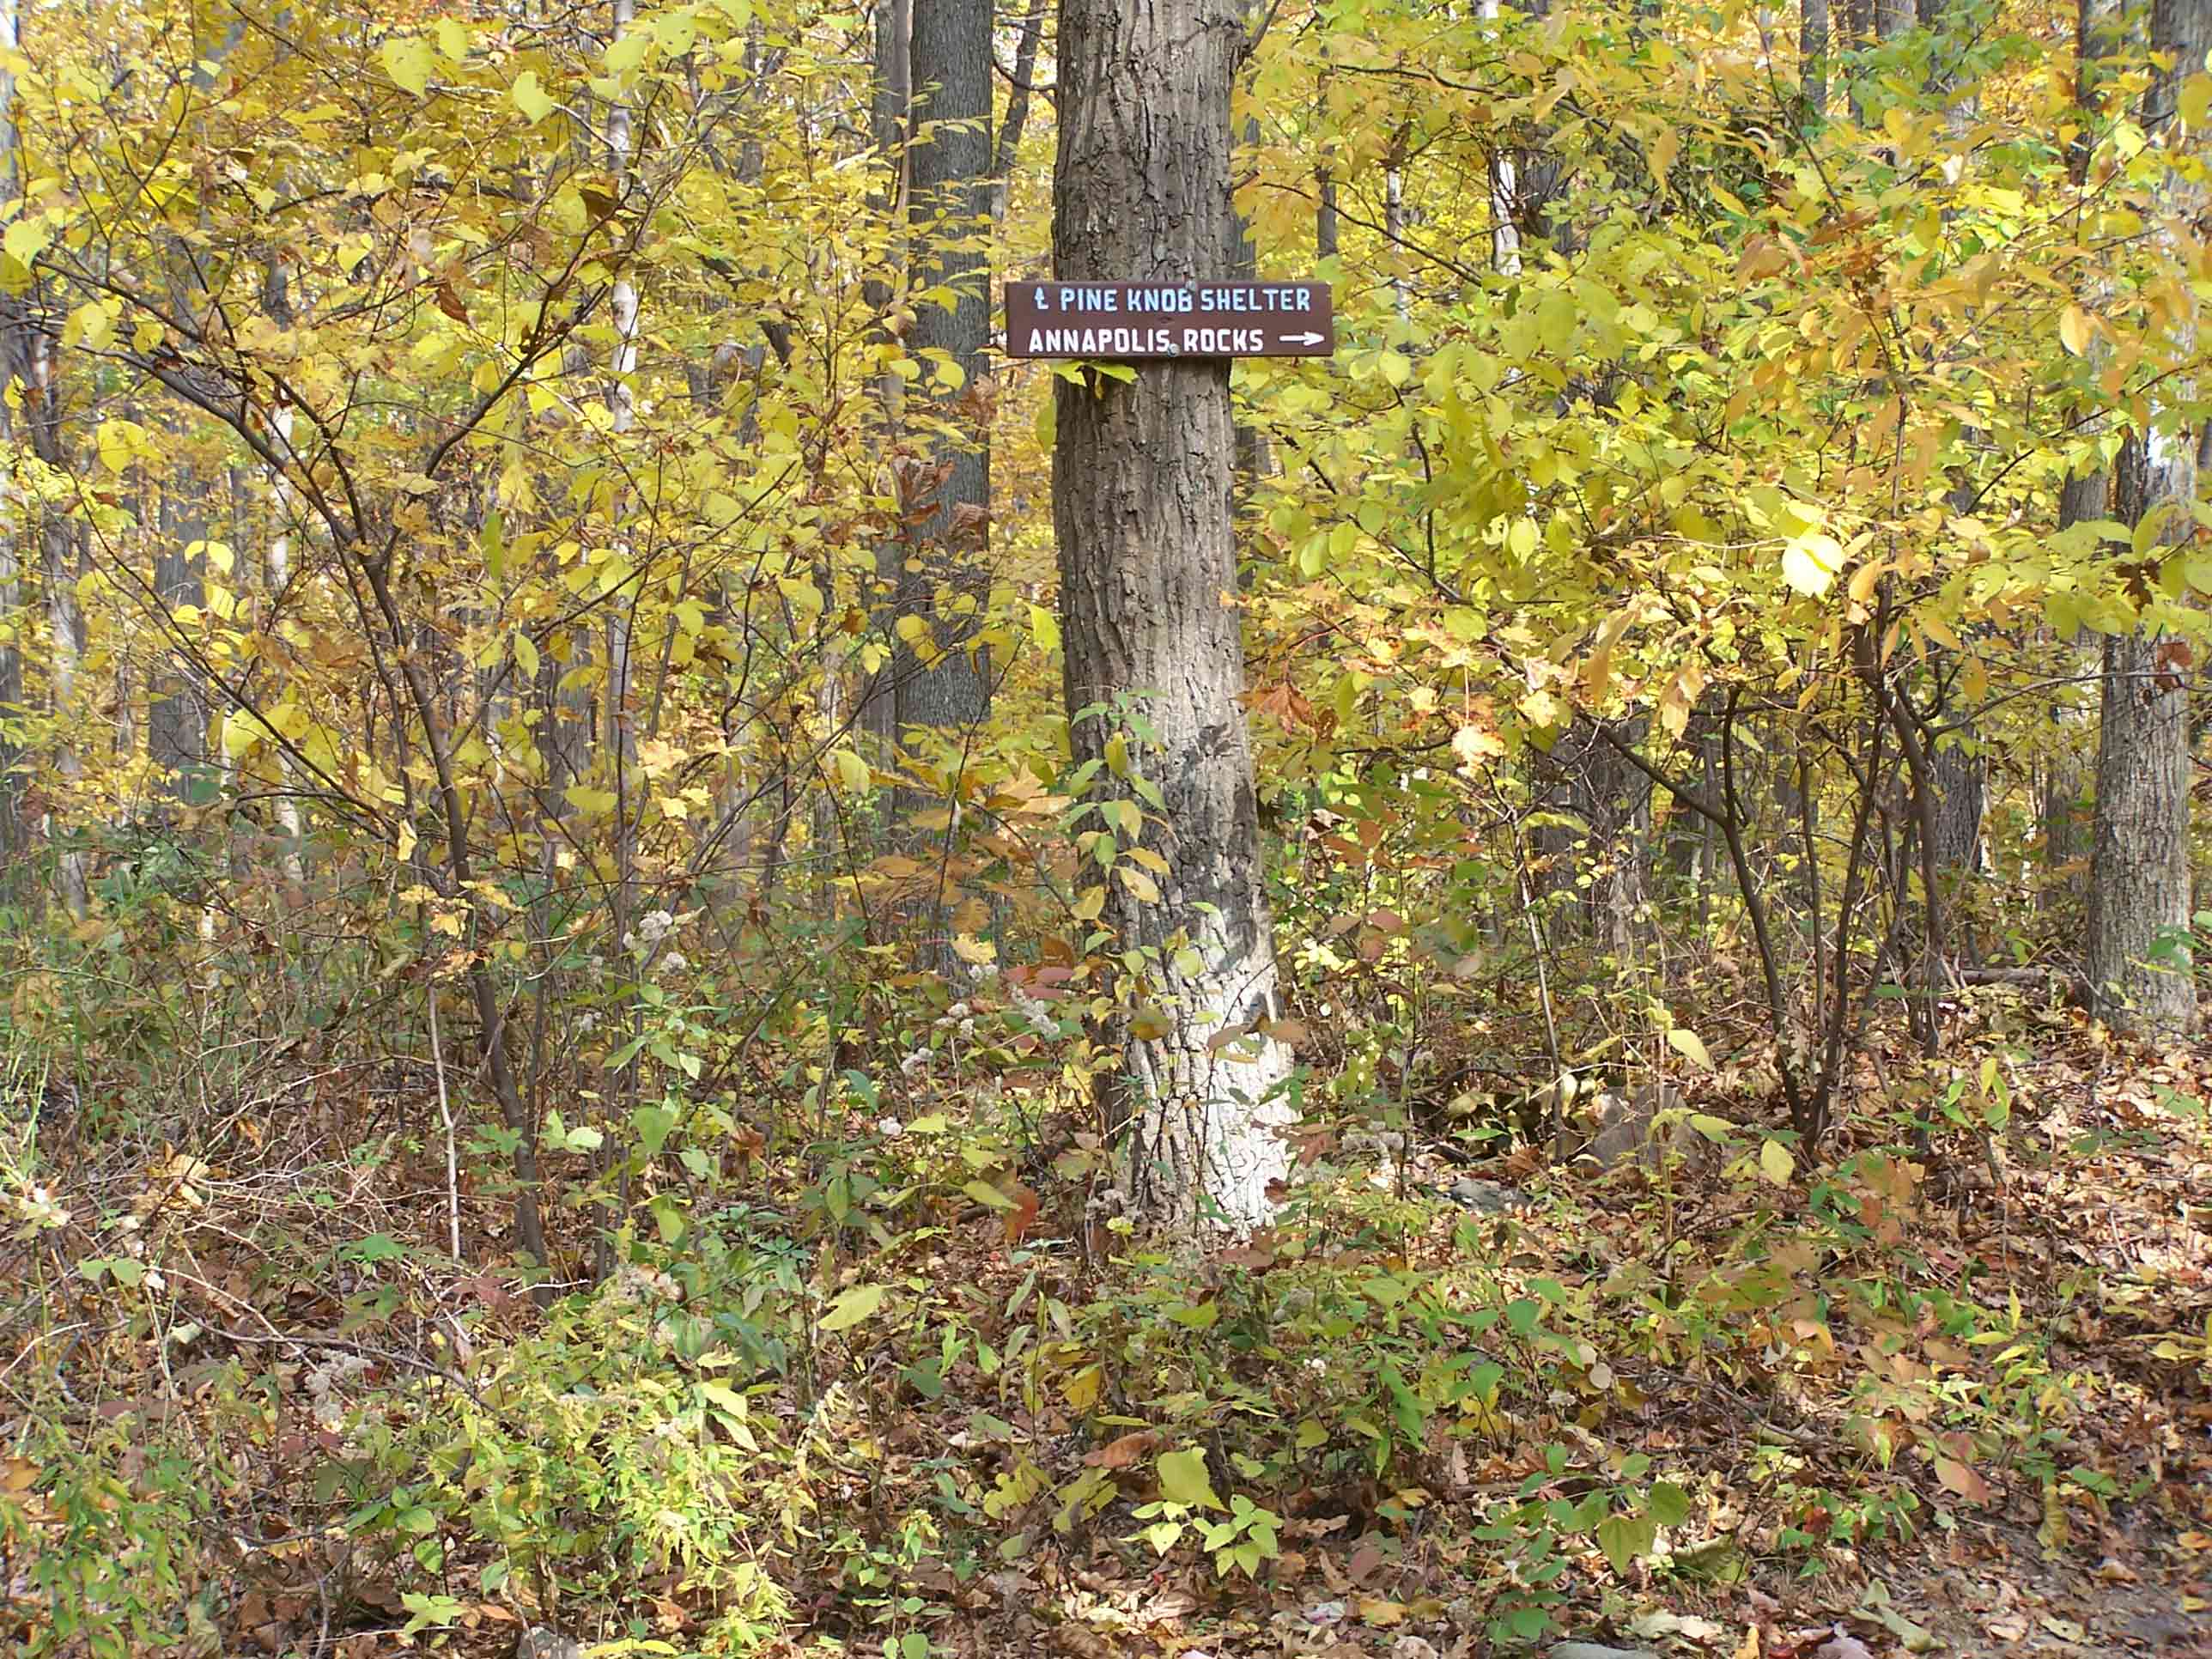 mm 8.0 - Sign for blue-blazed trail to Pine Knob Shelter. Courtesy at@rohland.org